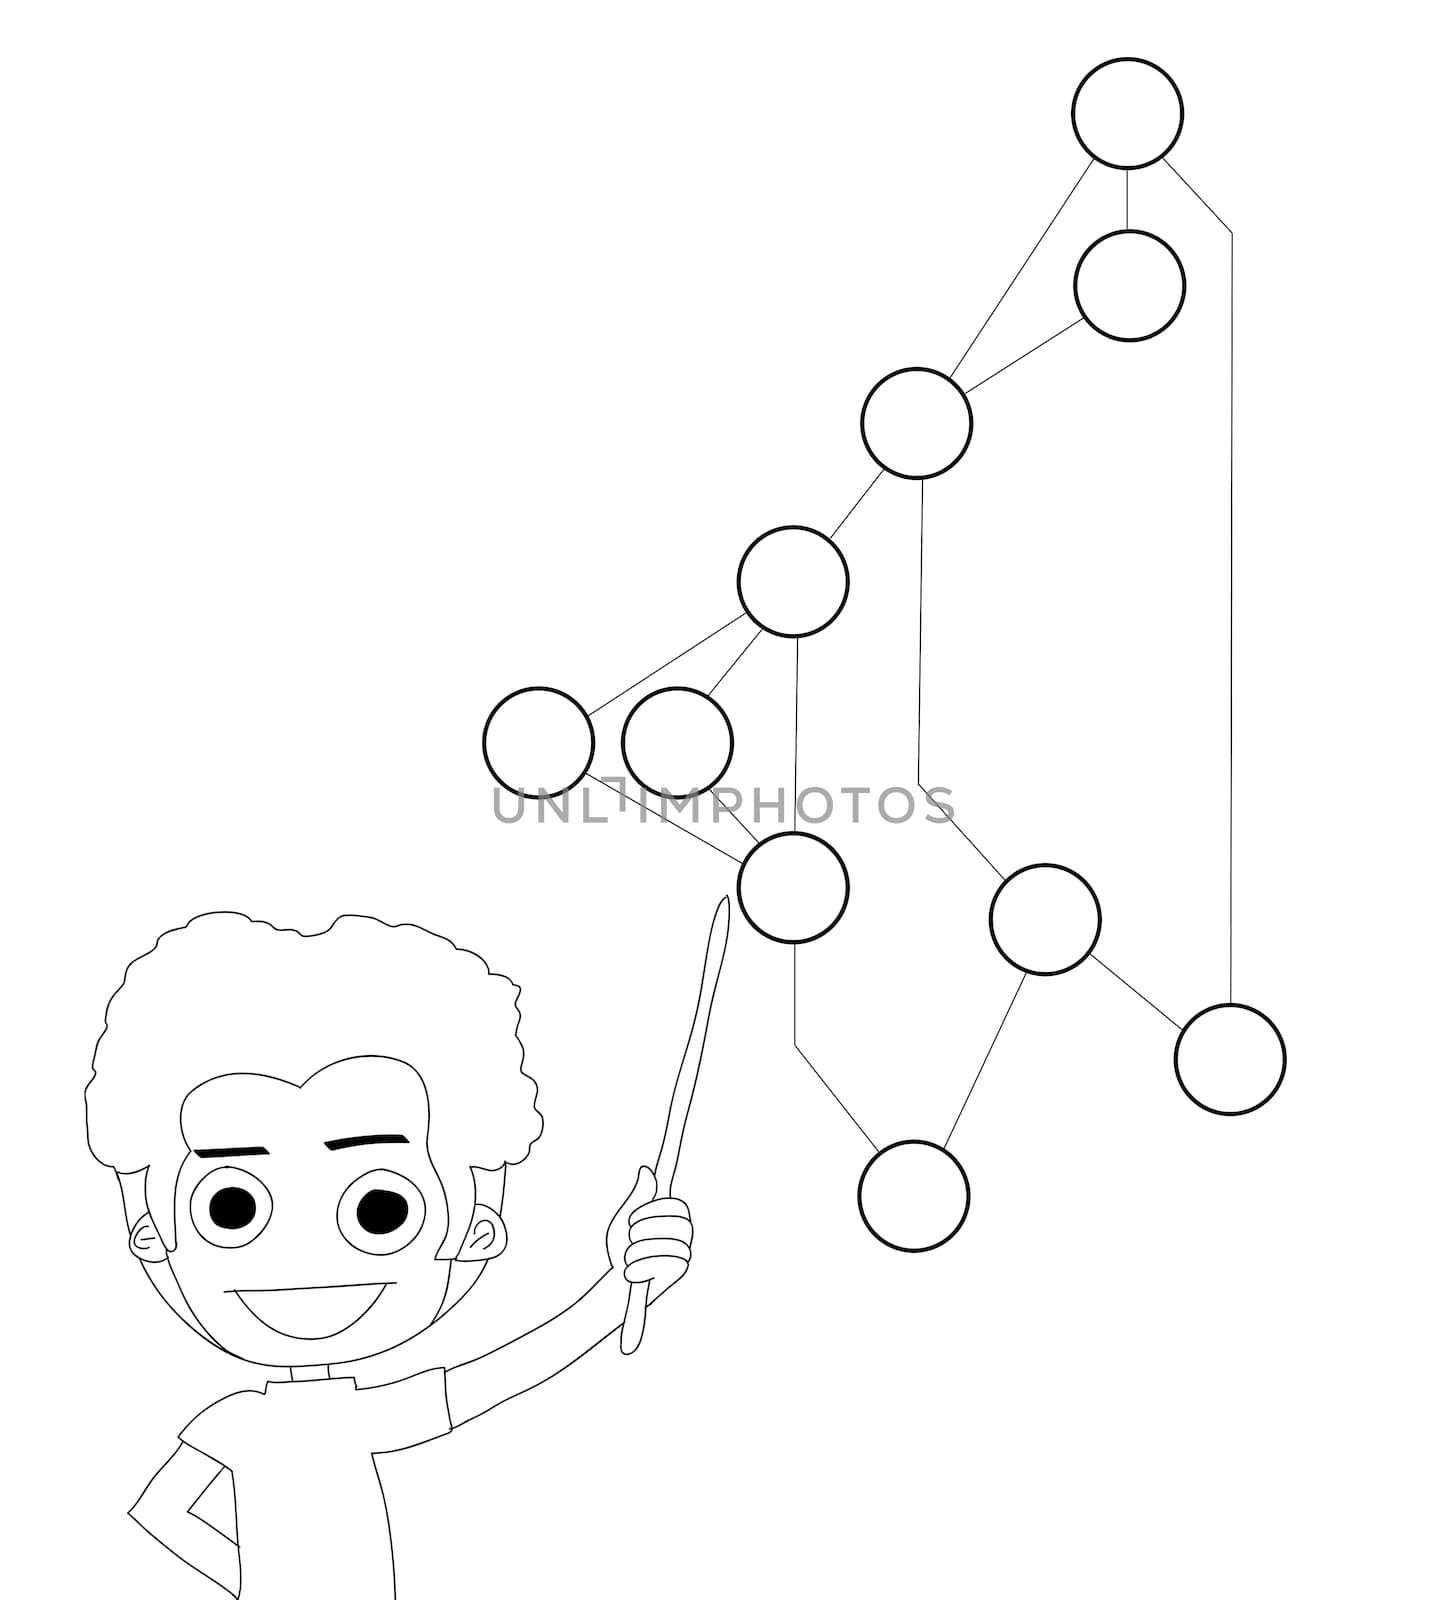 cartoon drawing of pointing chart social network